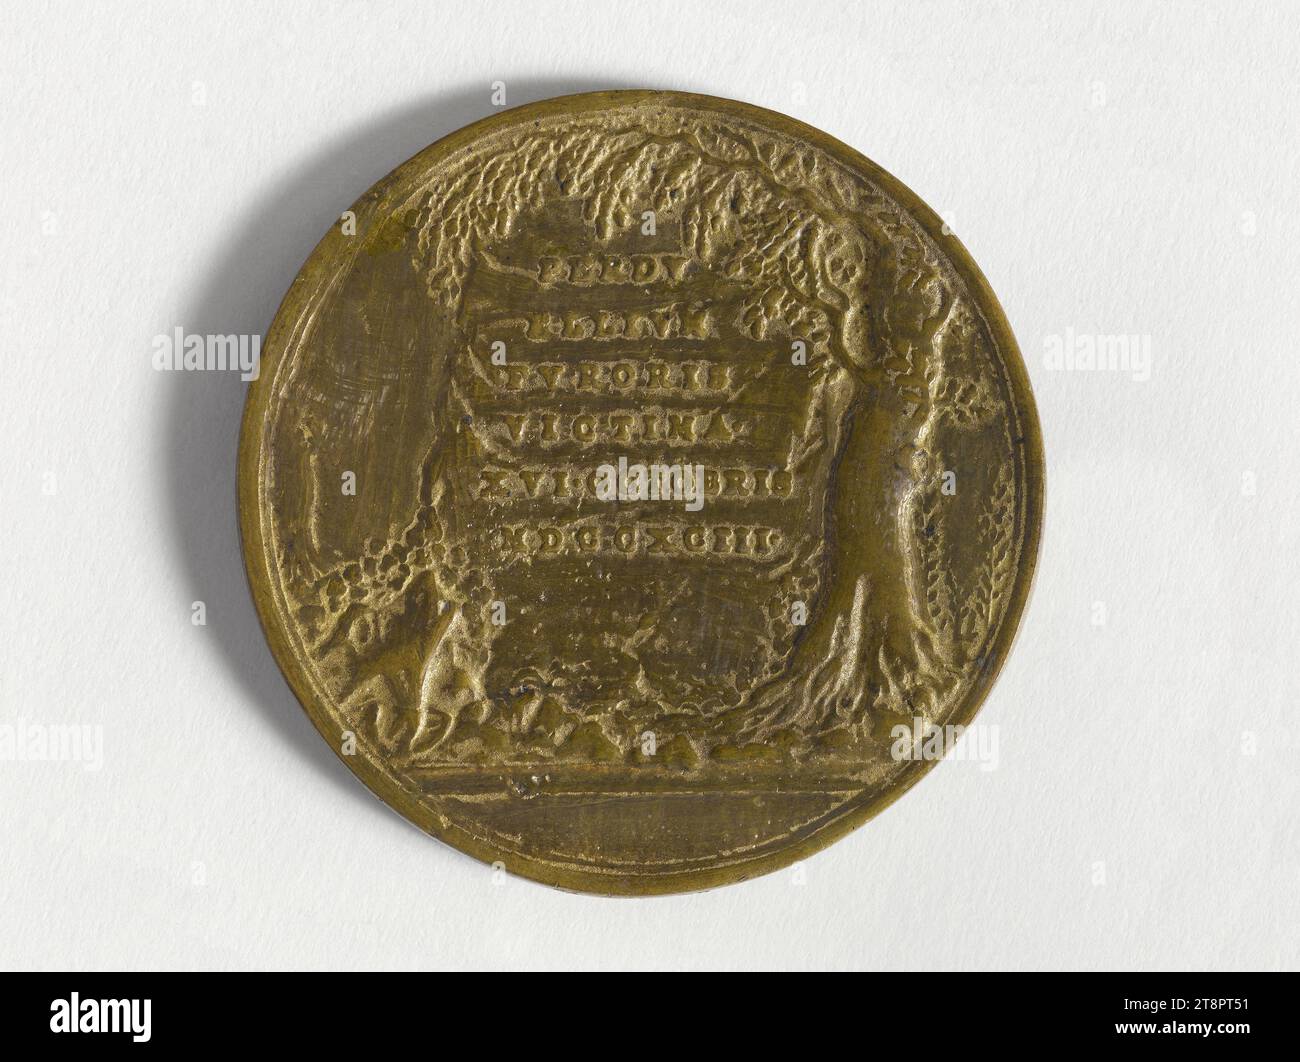 Commemoration of the execution of Marie-Antoinette, October 16, 1793, Baldenbach, Peter, Engraver, Array, Numismatic, Medal, Dimensions - Work: Diameter: 4.5 cm, Weight (type size): 19.62 g Stock Photo